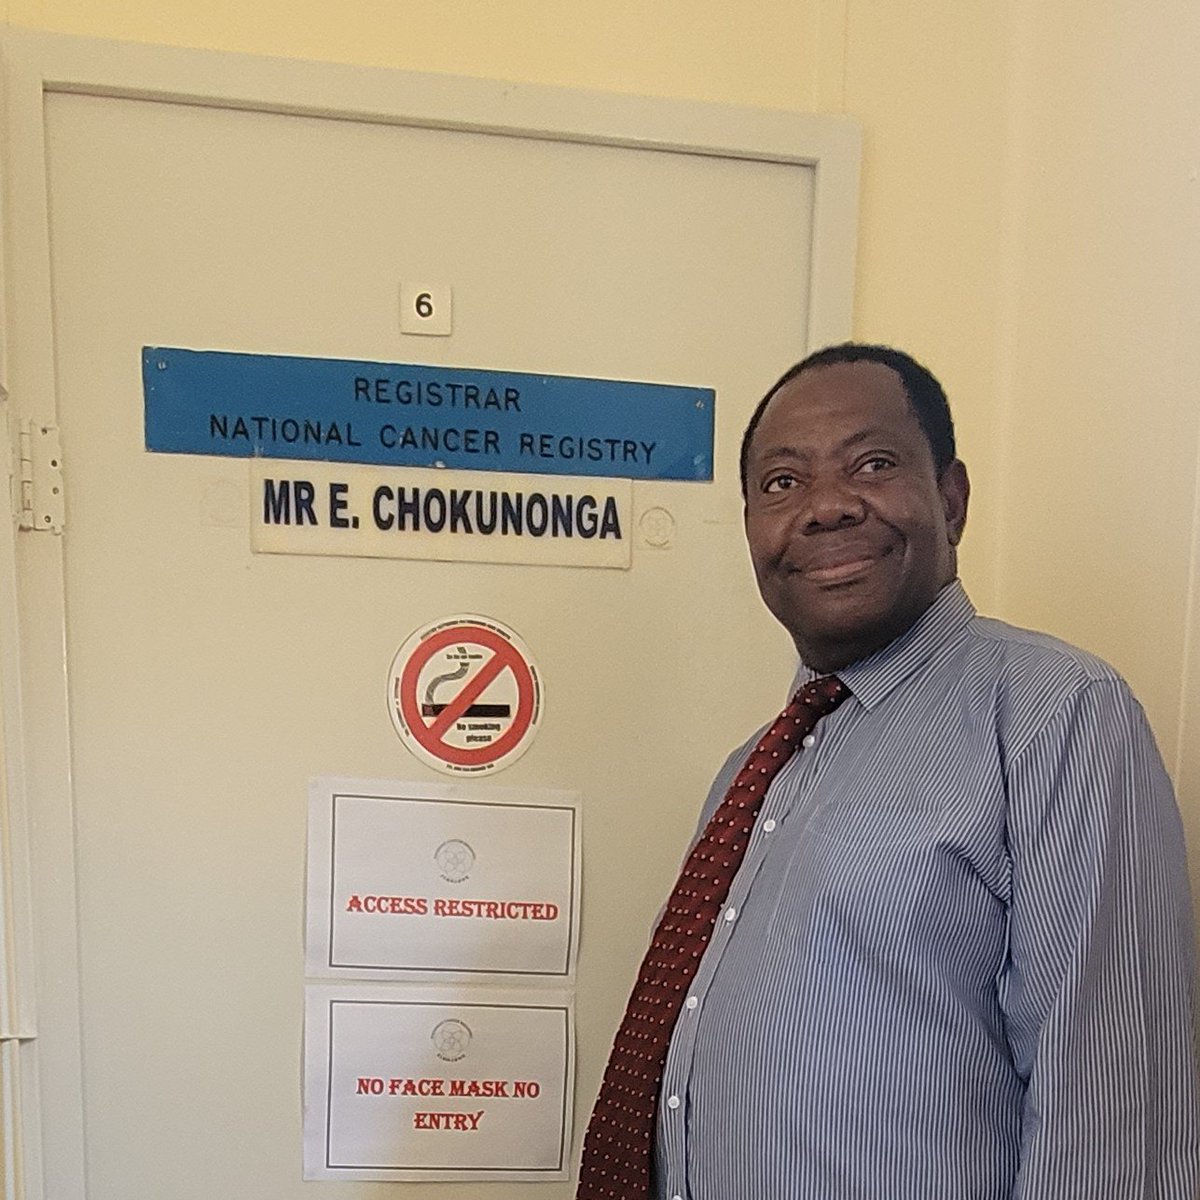 (Finally) at the Zimbabwe National Cancer Registry in Harare, a PBCR providing high quality cancer incidence since 1985. Thanks Eric, Margaret & the team for fruitful conversations on future work & of course the wonderful company - we'll be back! @GICR_IARC @IARCWHO #Data4Health